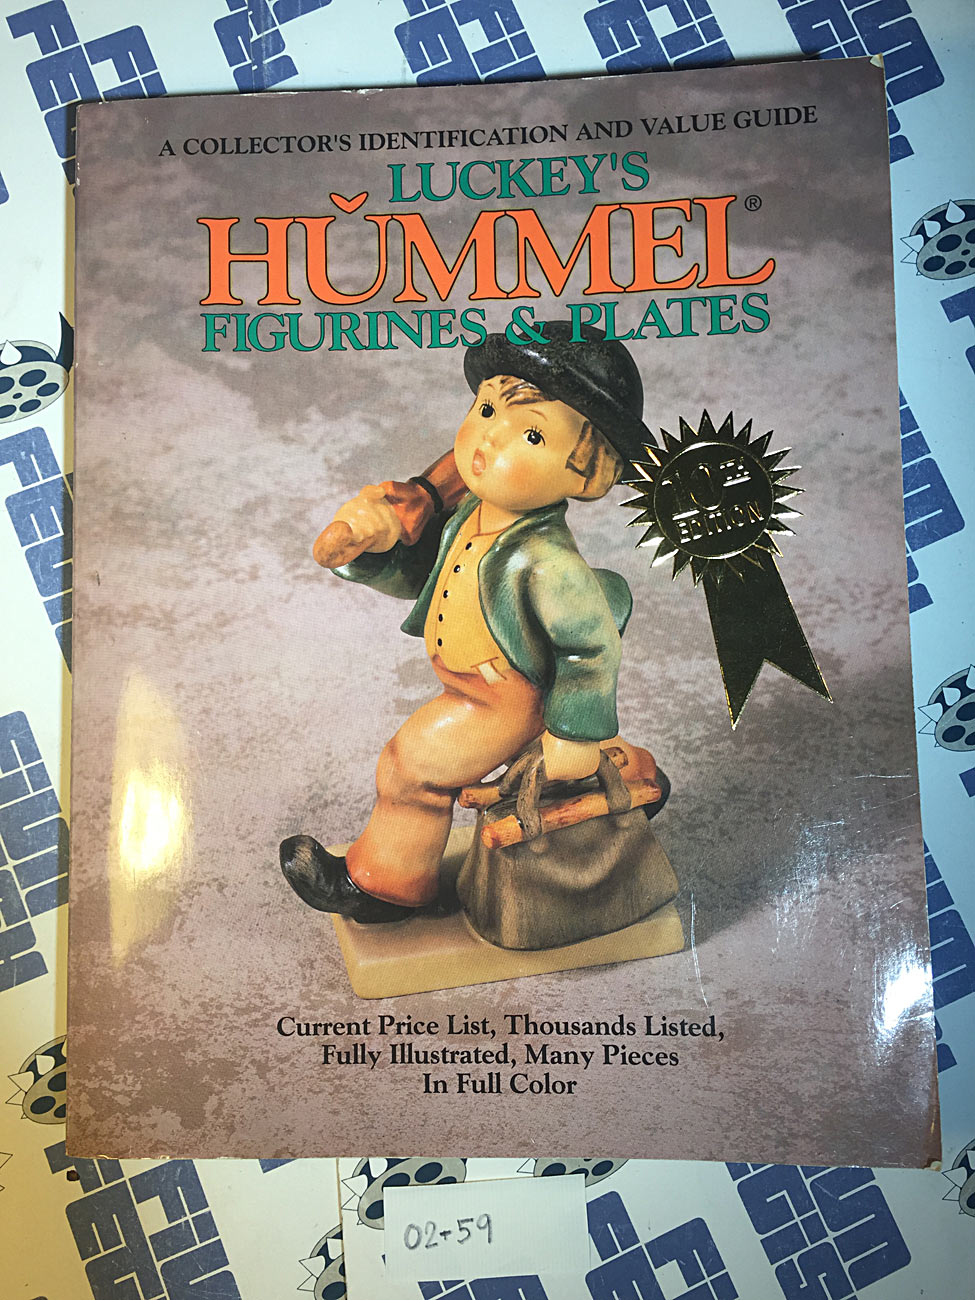 Luckey’s Hummel Figurines and Plates Collector’s Identification & Value Guide [0259]